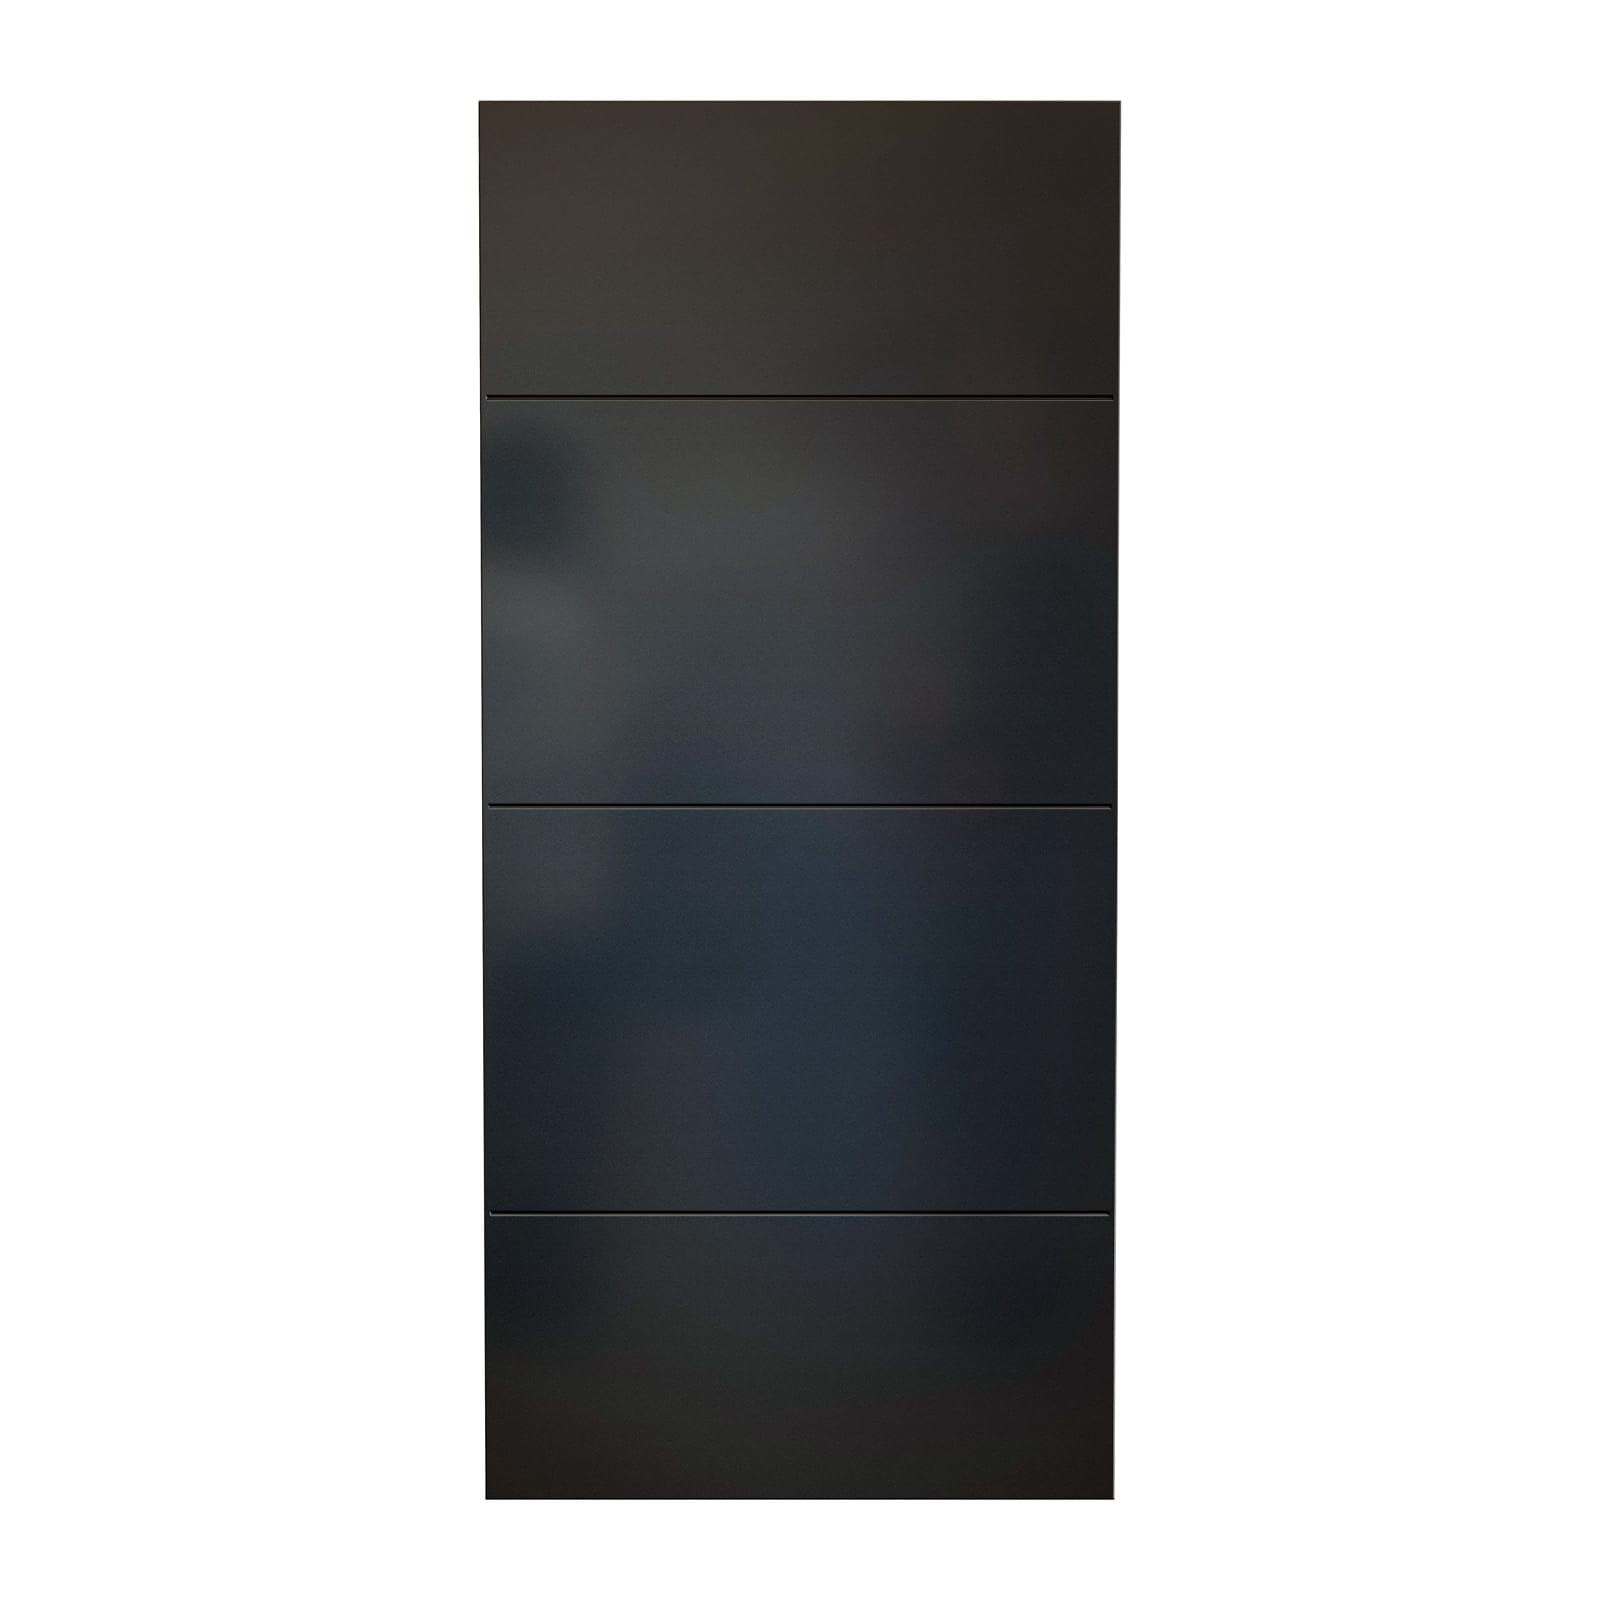 Alitherm 400 Door with PM0007P panel